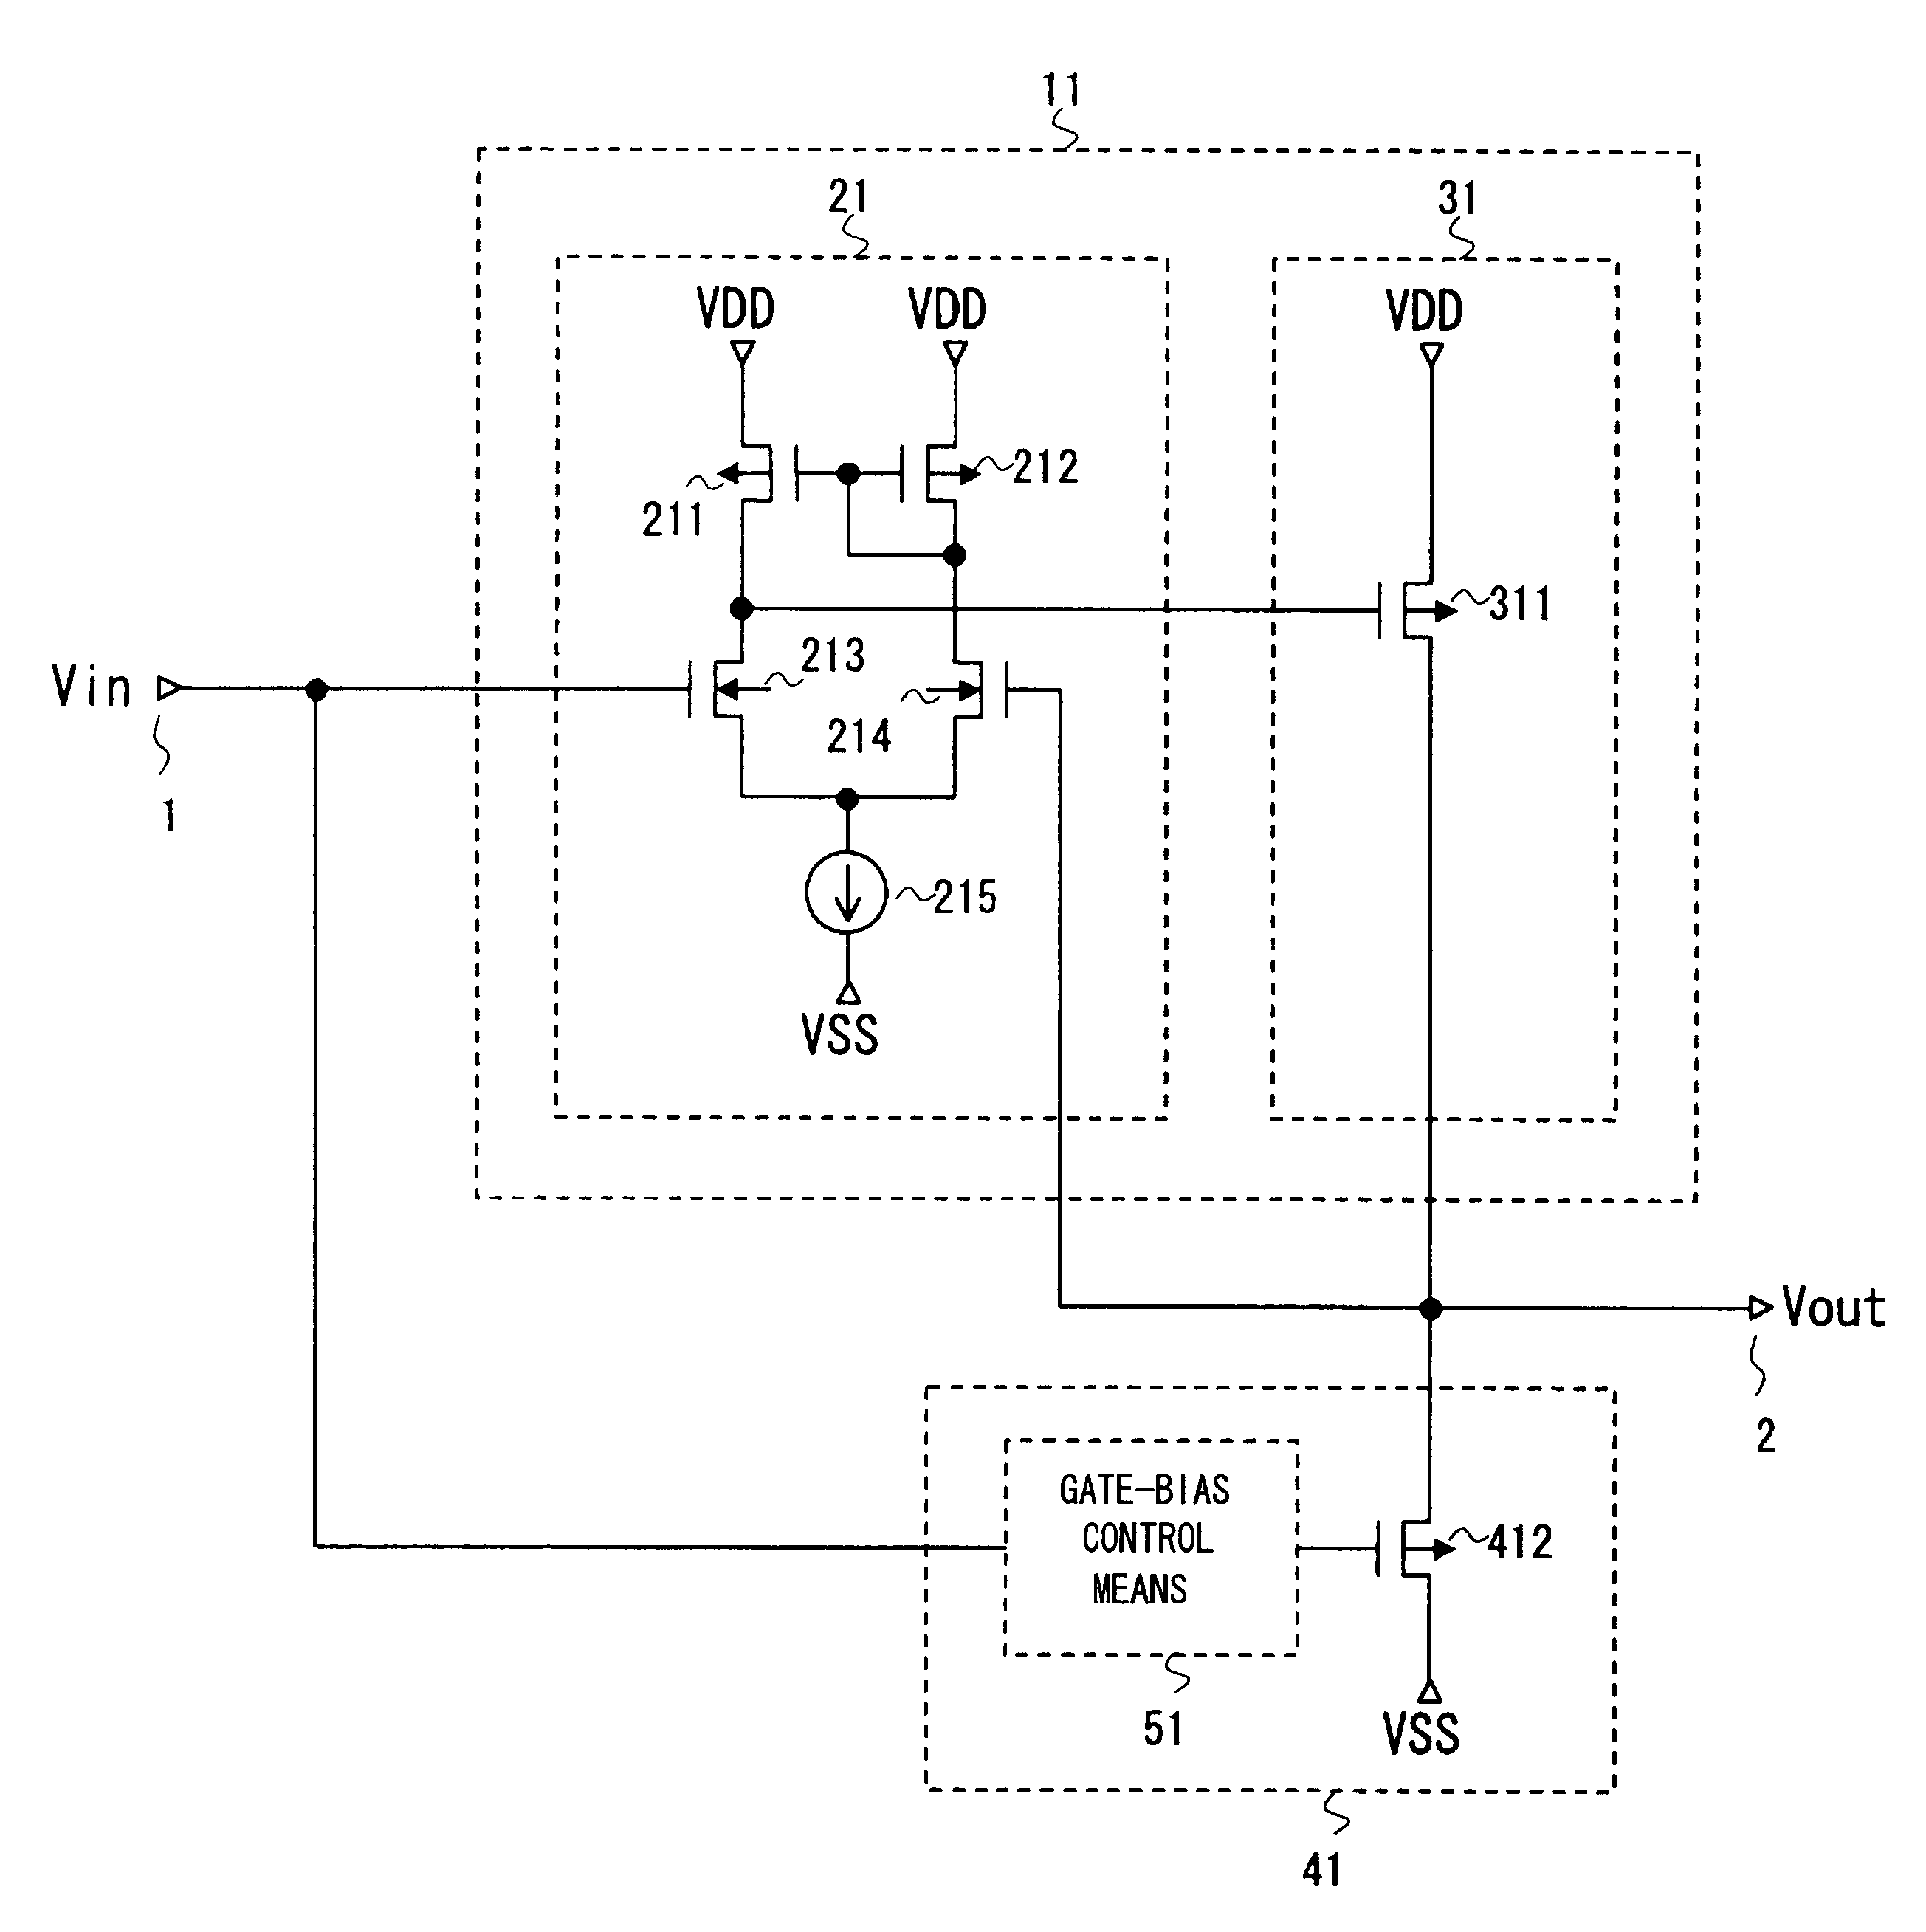 Feedback-type amplifier circuit and driver circuit